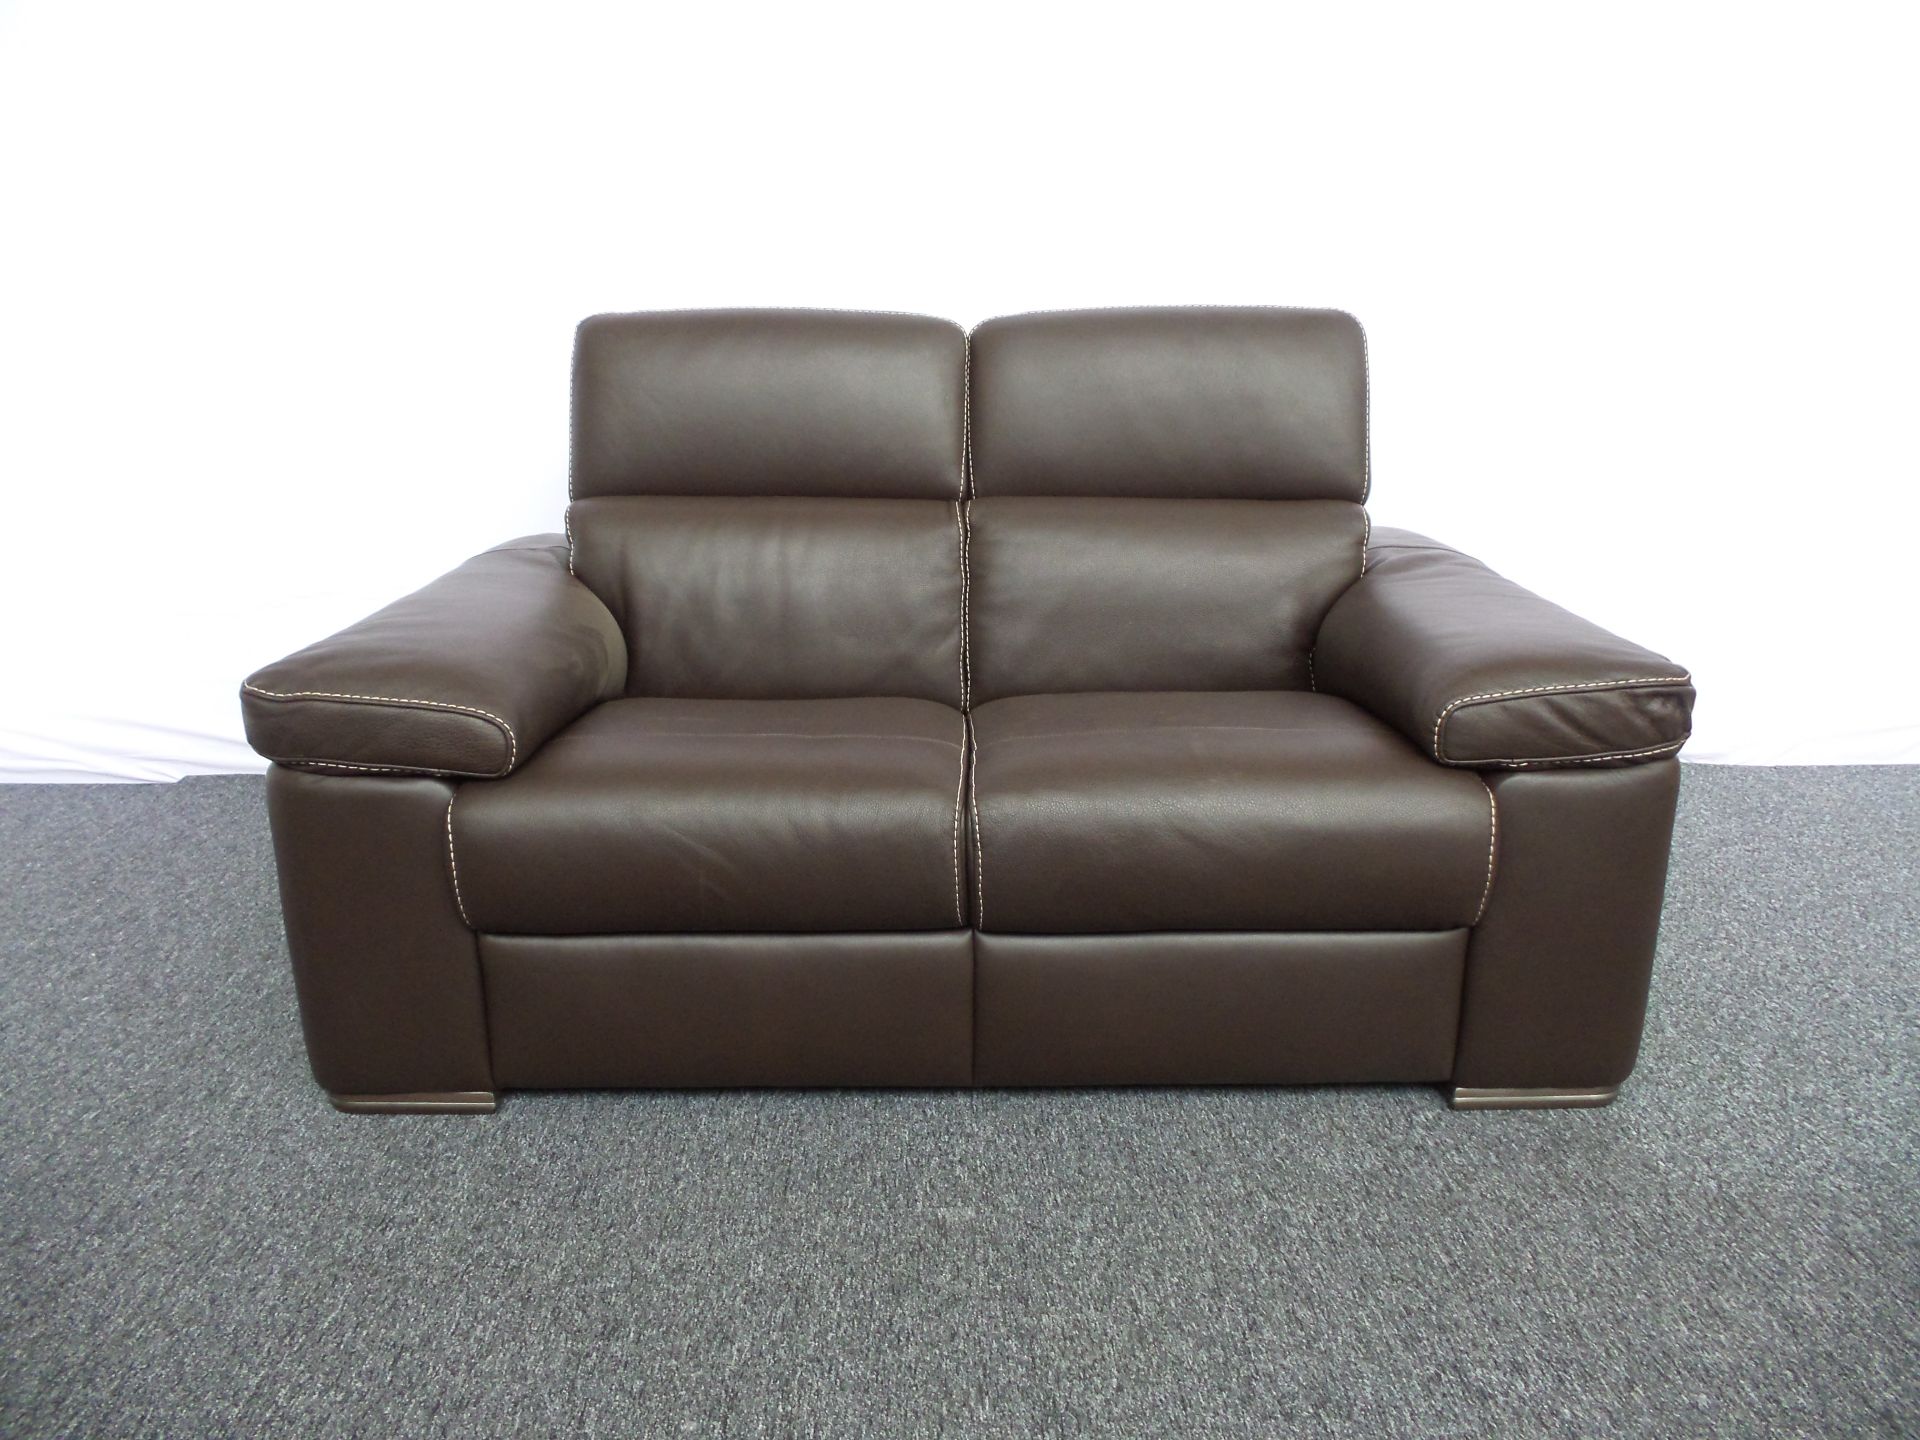 NATUZZI EDITIONS DESIGNER - 2 Seater Brown Leather Sofa Adjustable Headrests Sofa Dimensions: Height - Image 2 of 2